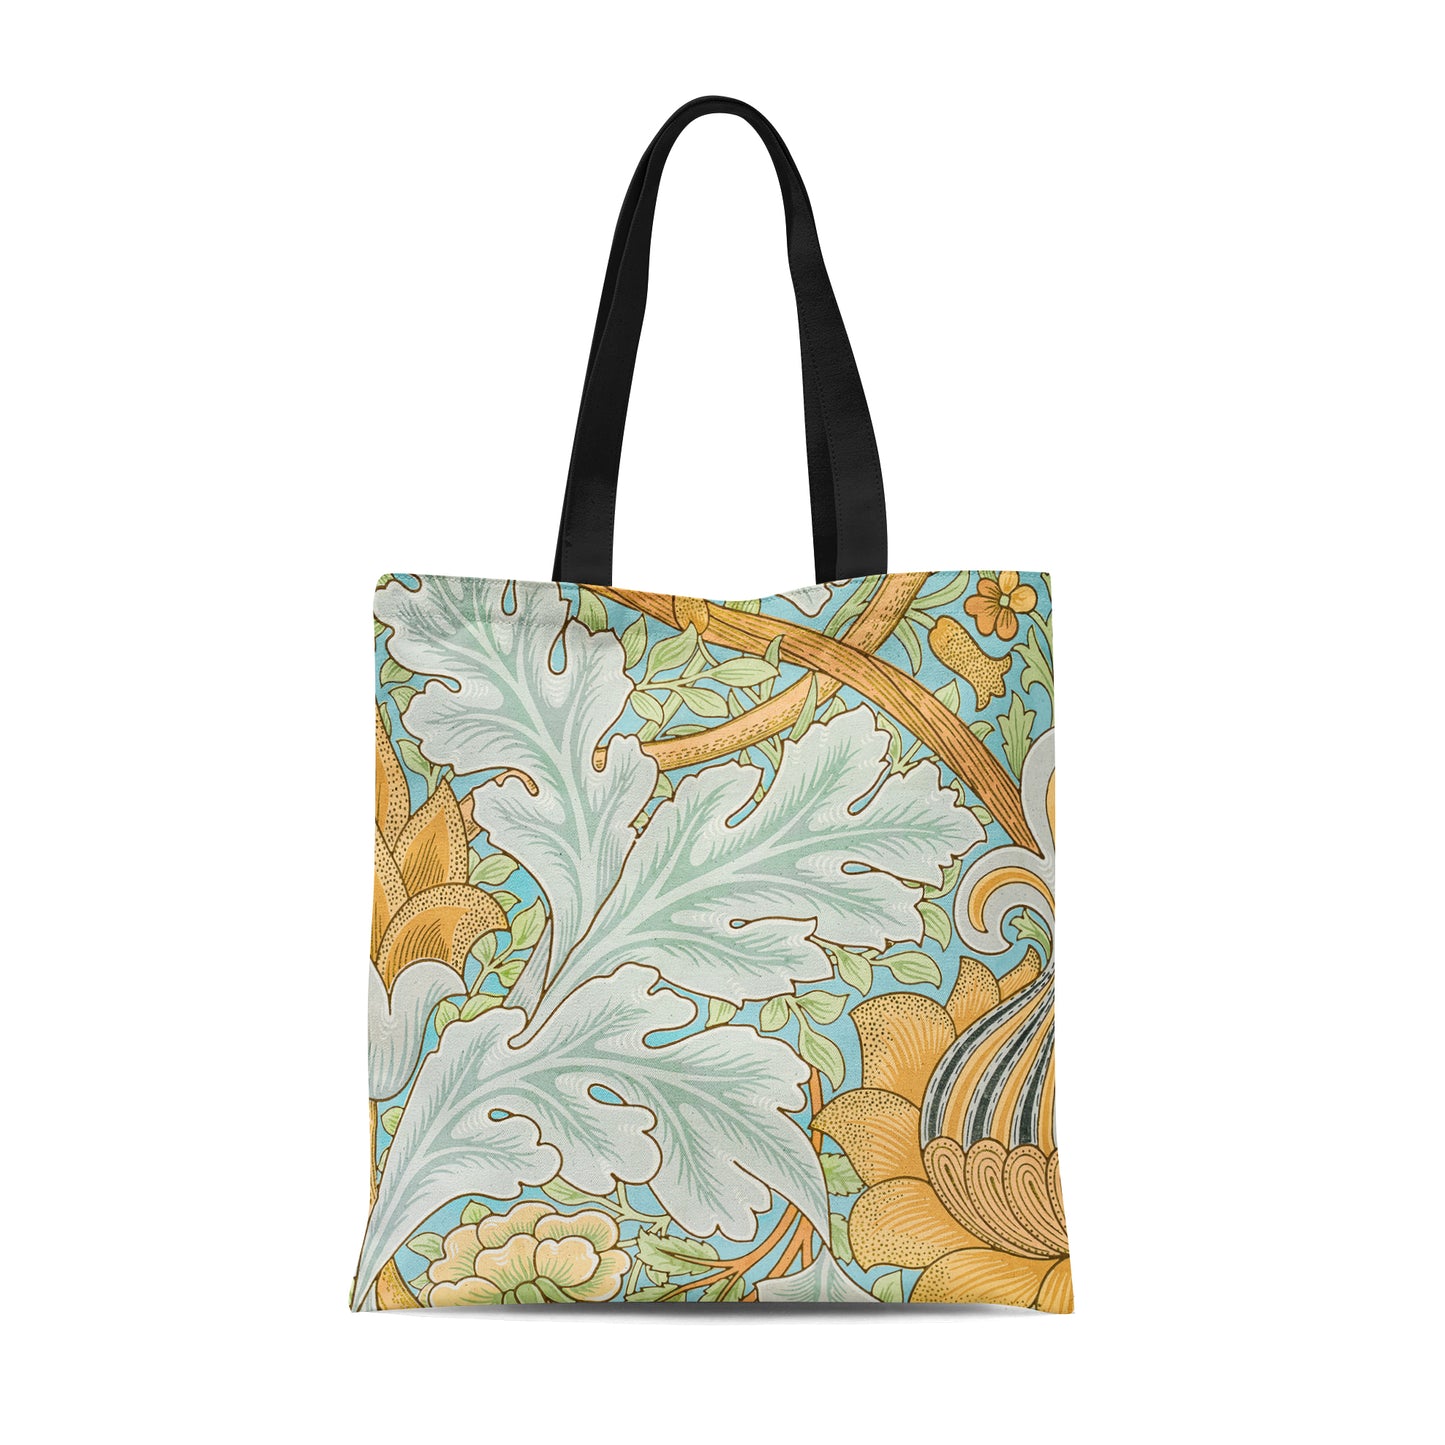 Tote Bag with Art Nouveau Pattern from 1881